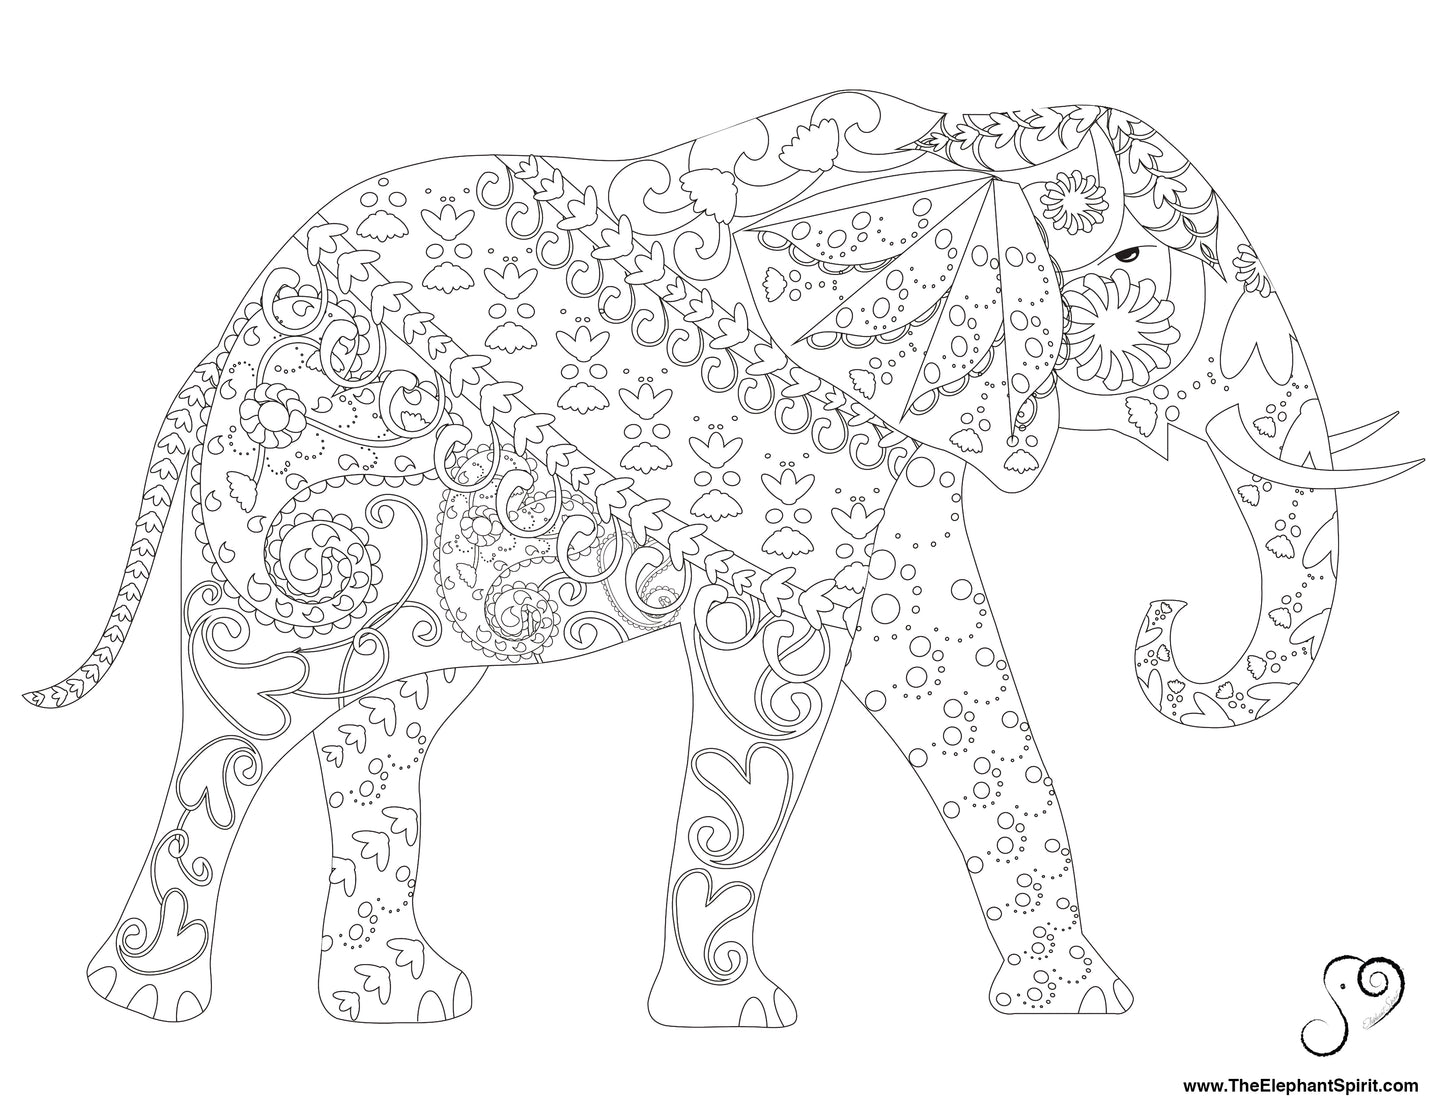 FREE Coloring Page 06-09